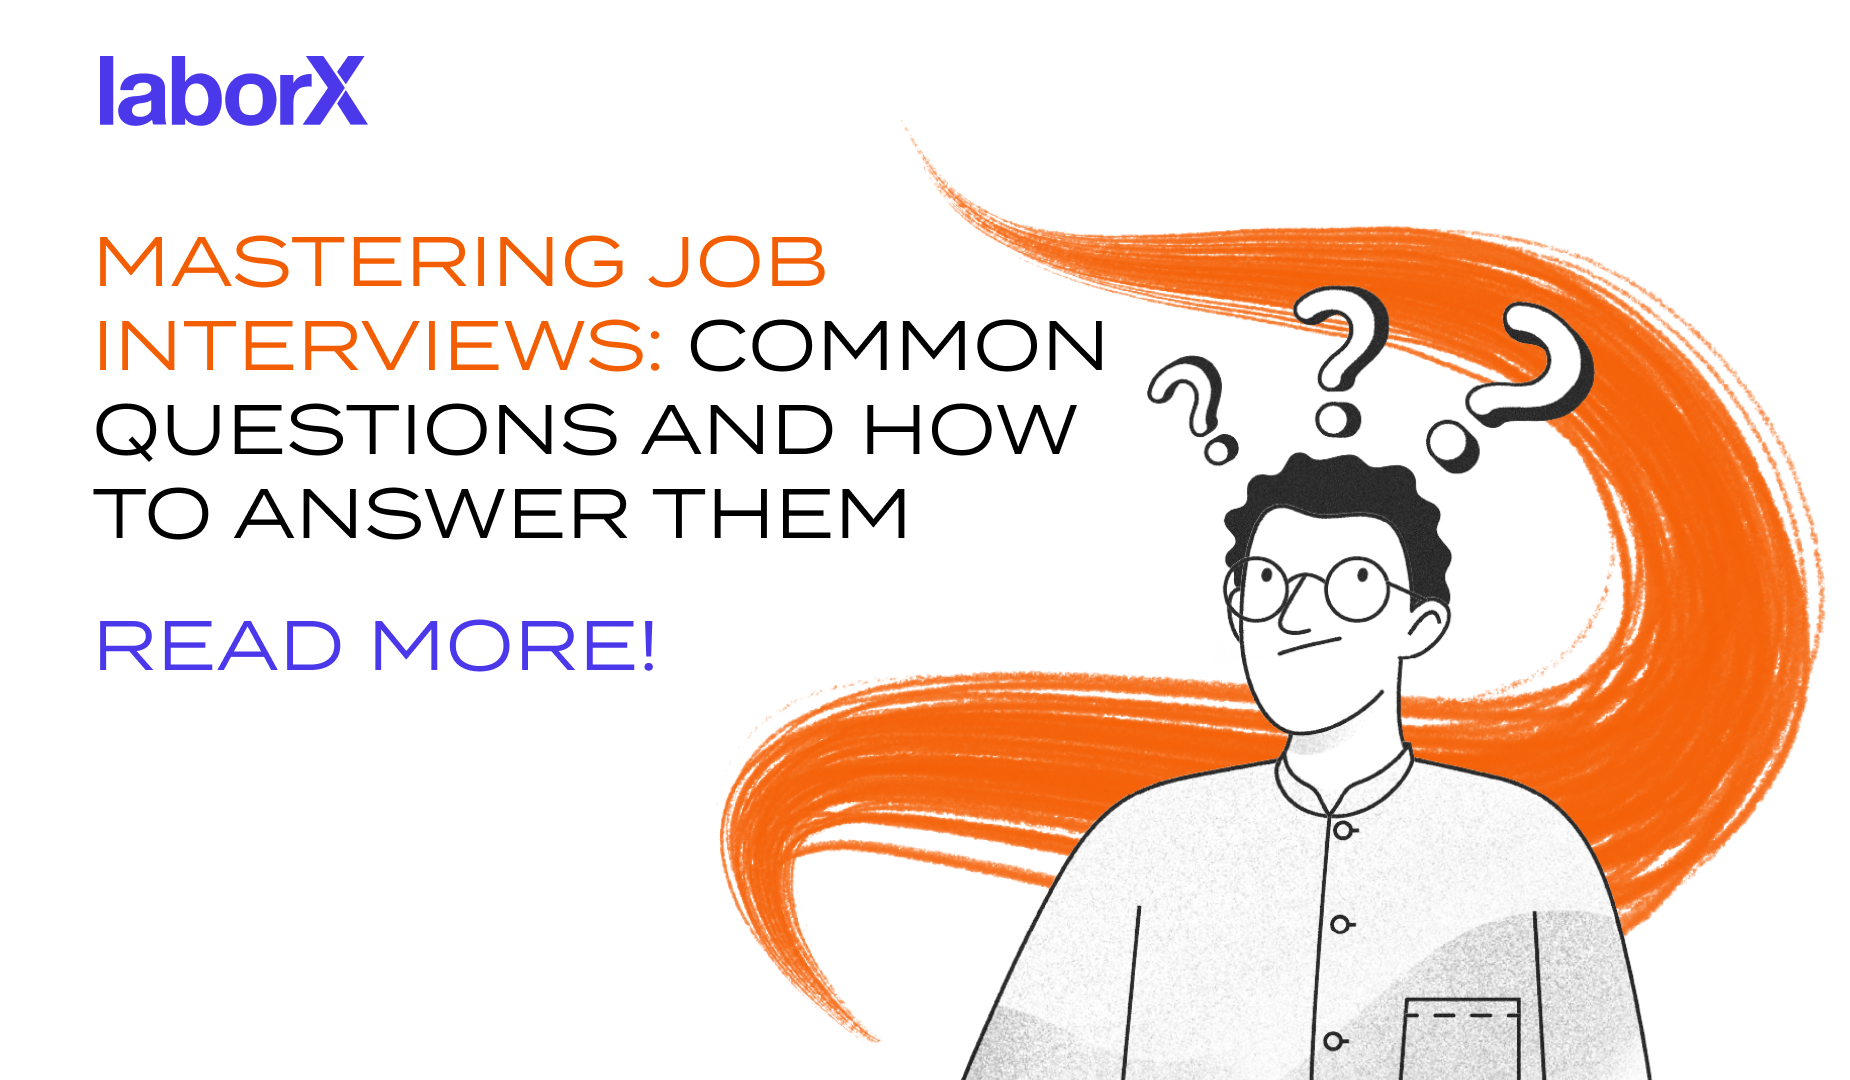 Mastering Job Interviews: Answering Common Questions